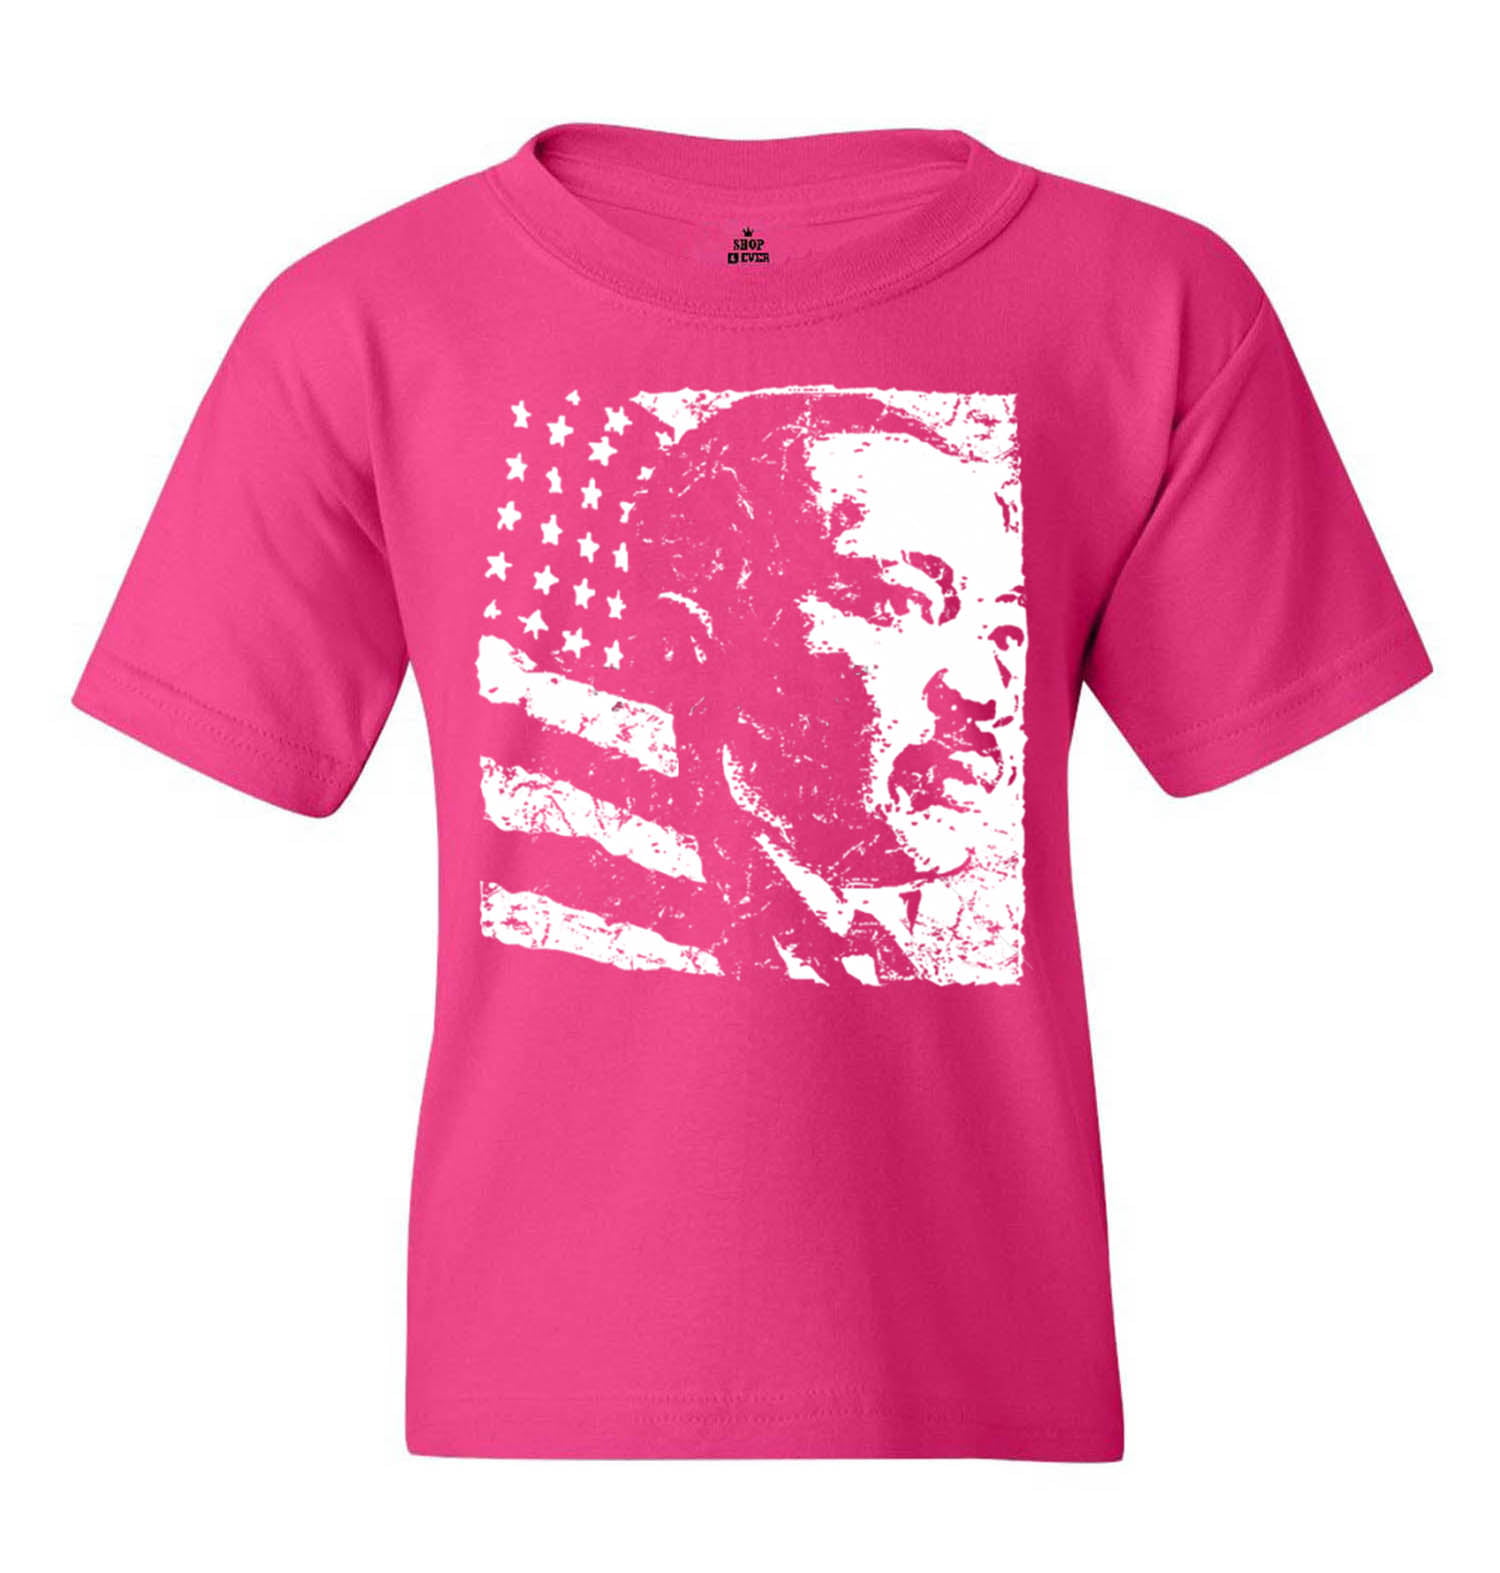 Shop4Ever Kids Martin Luther King Jr. Graphic Child's Youth T-Shirt ...